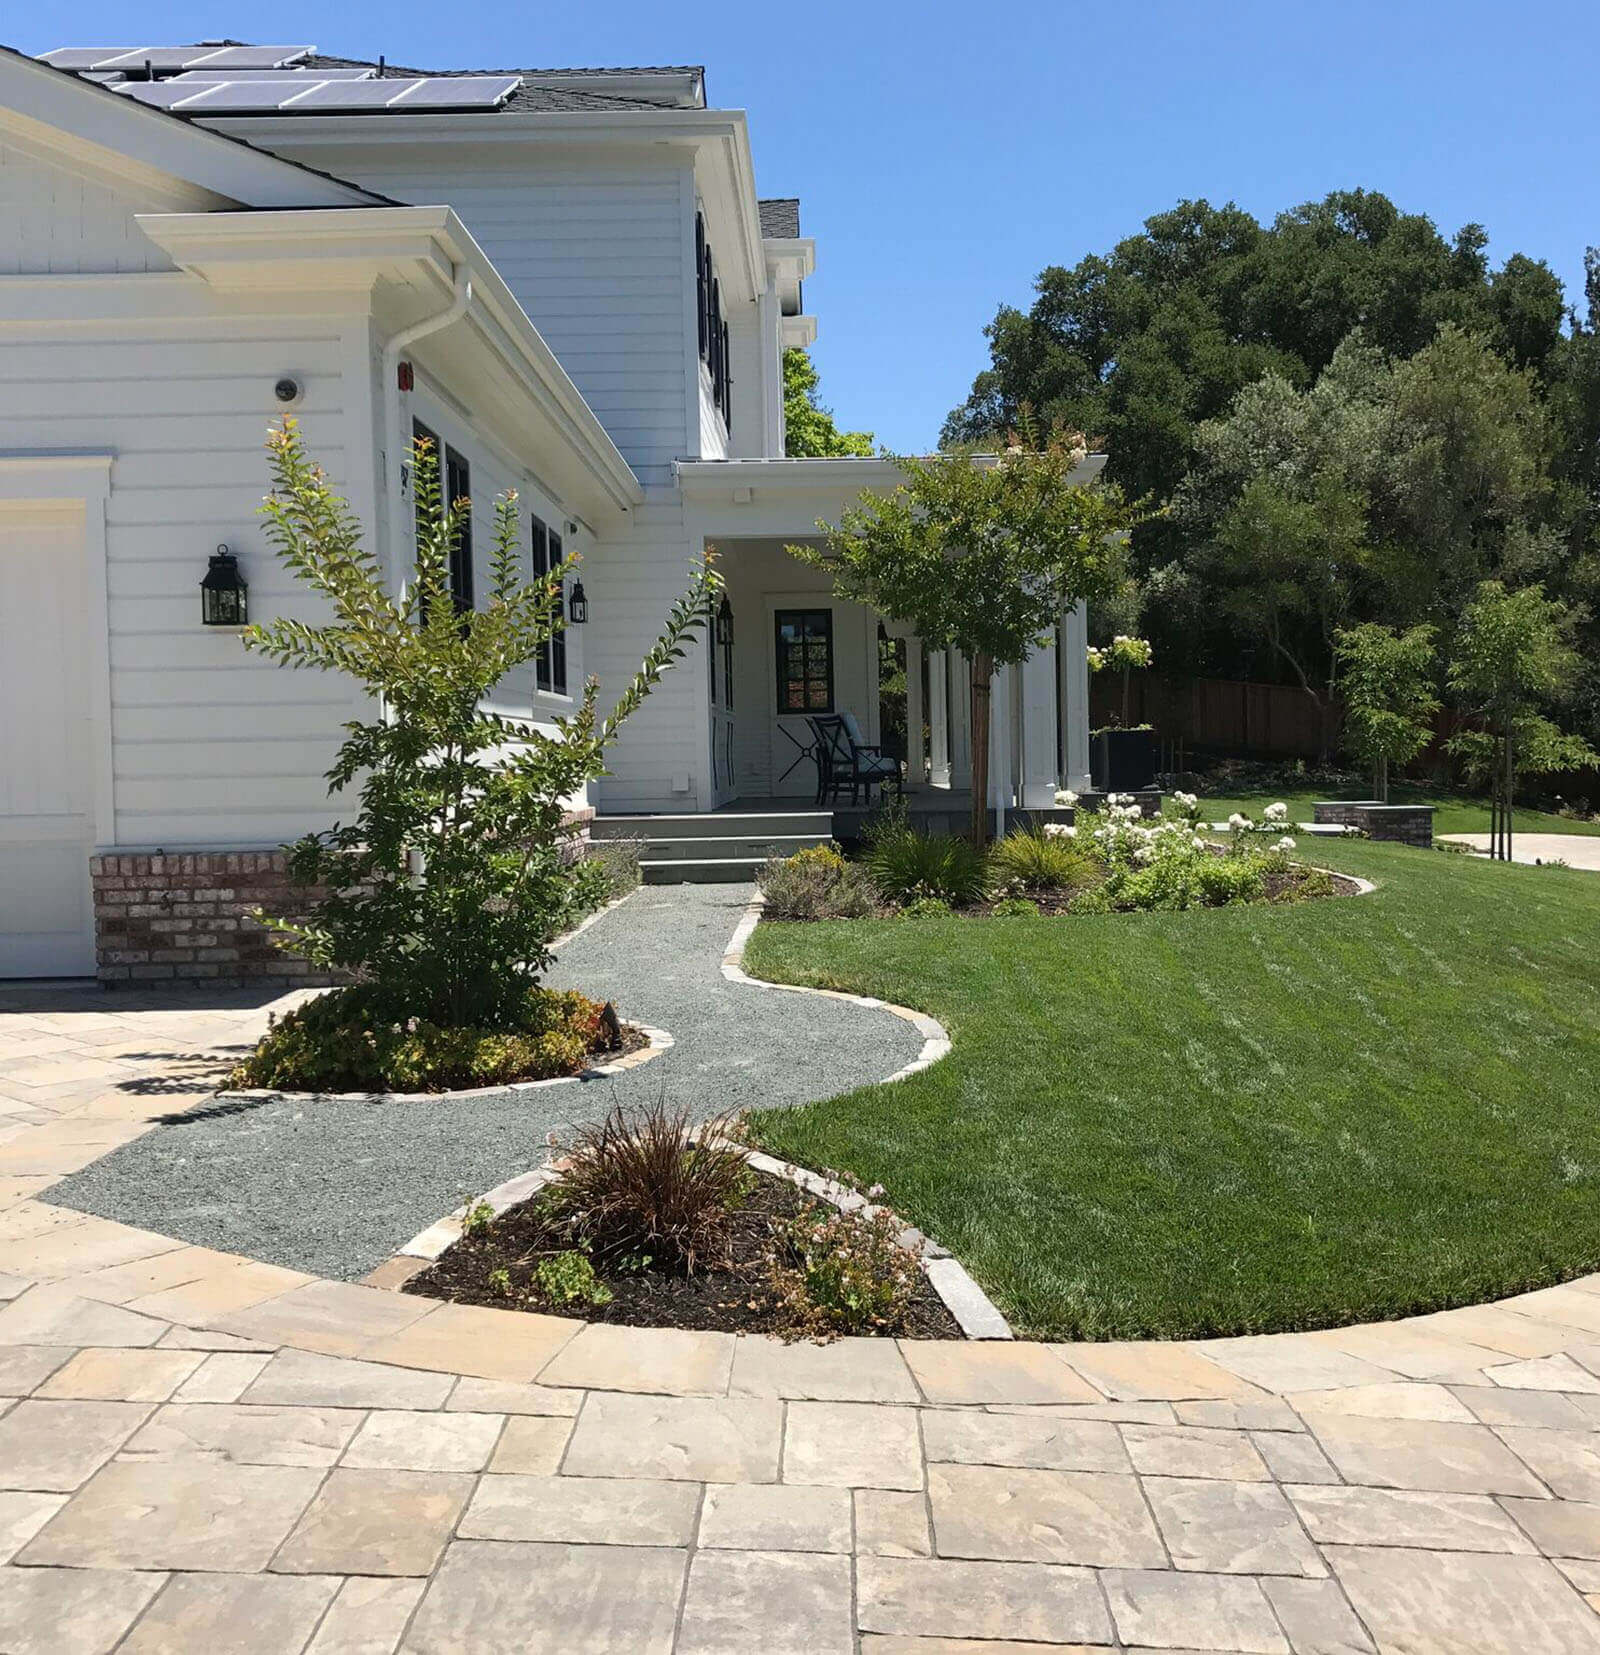 Gravel Path leading from front of house to stone tile driveway